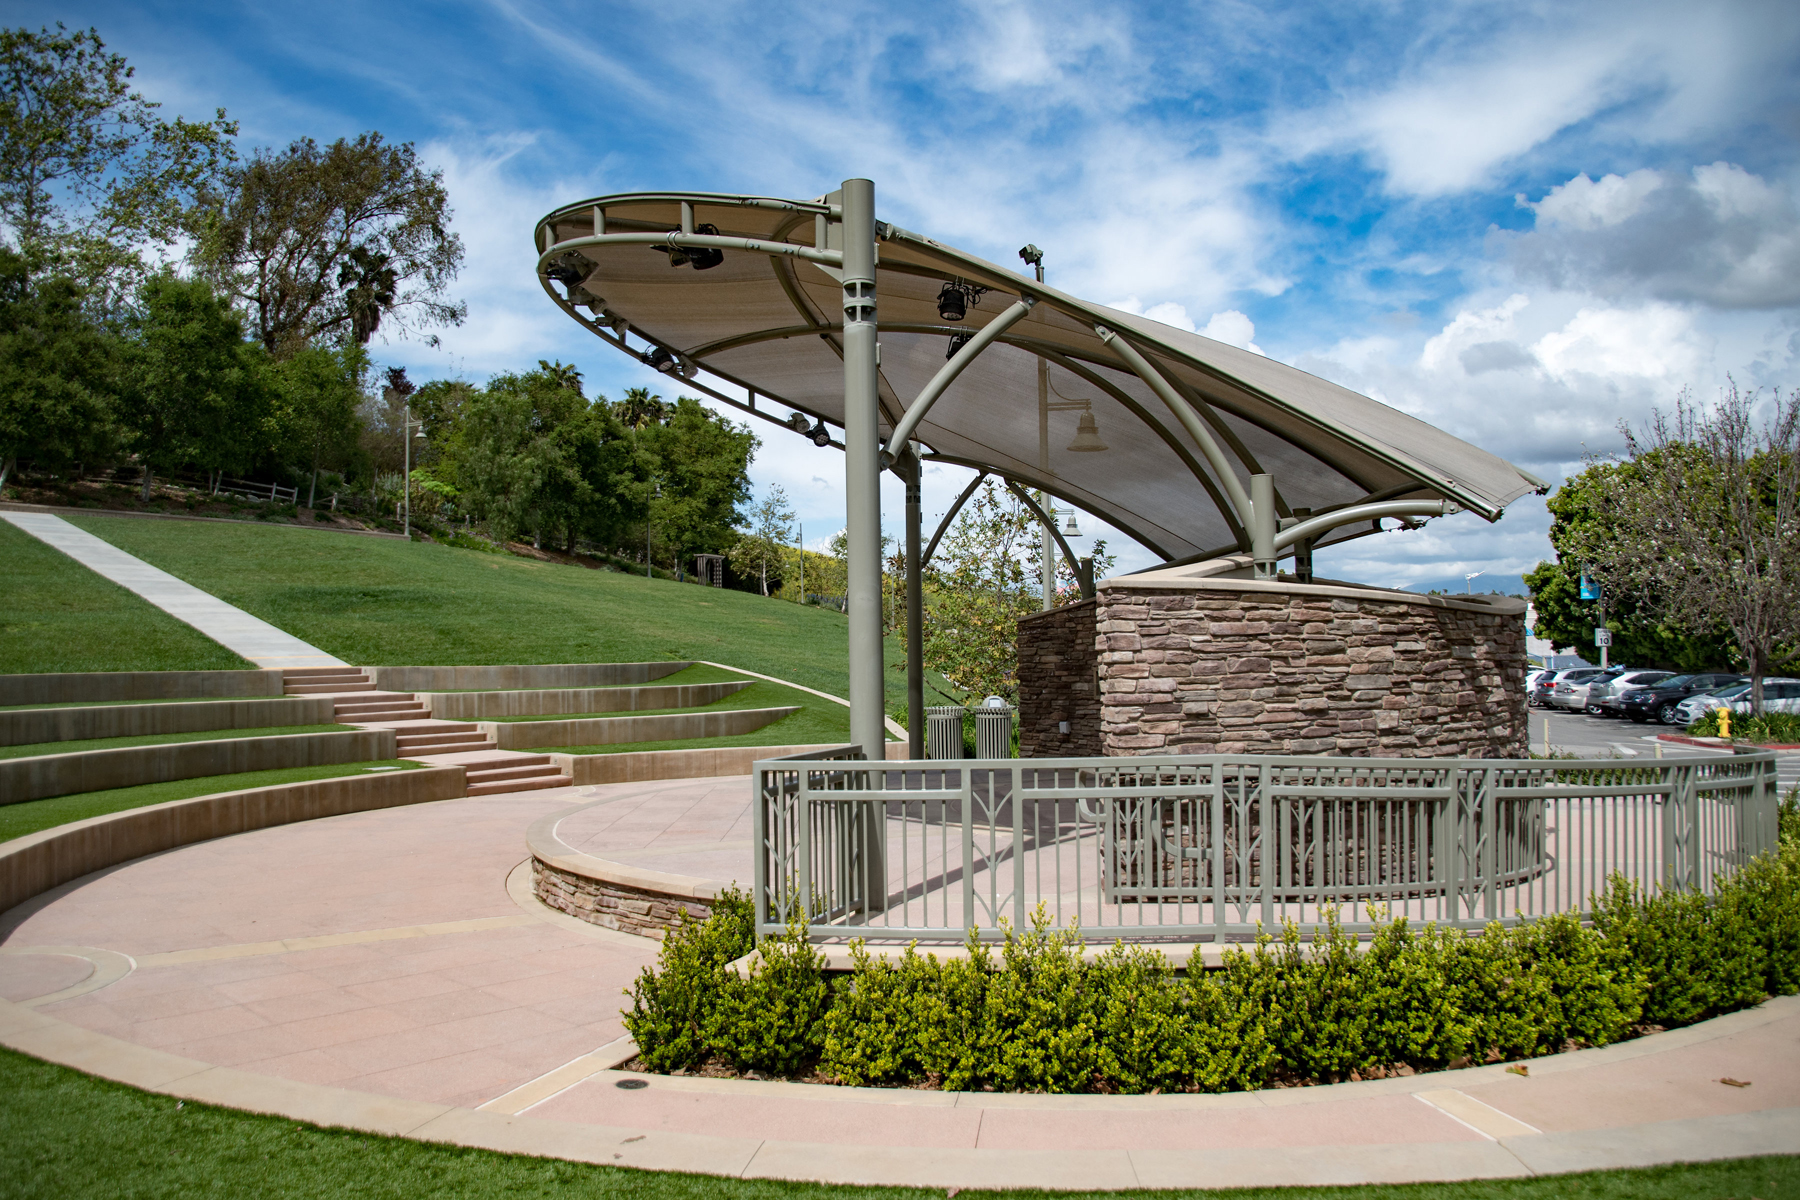 side view of shade covering outdoor venue